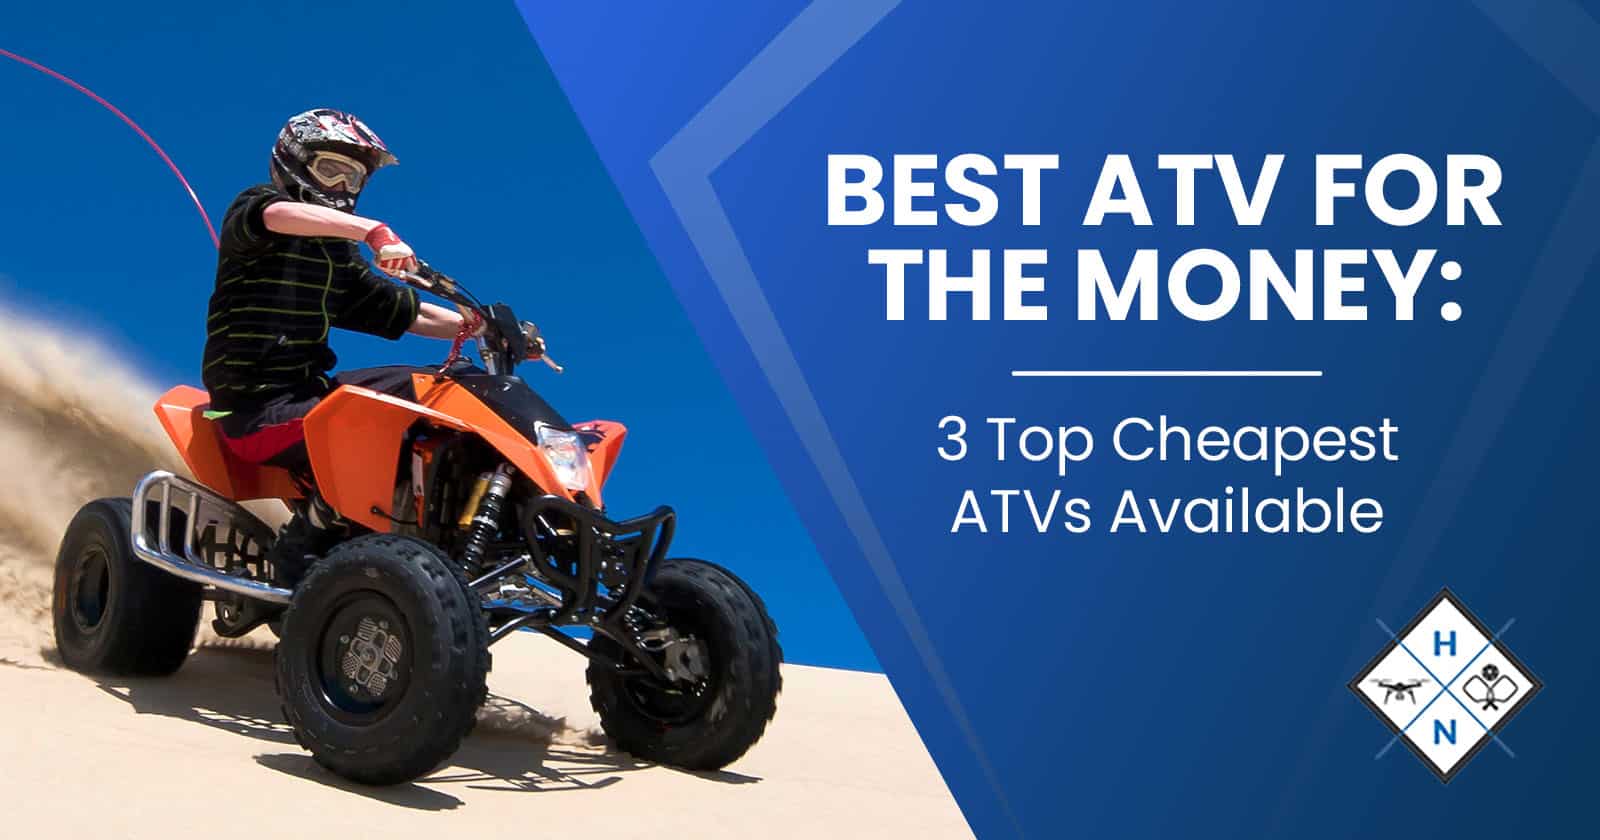 Best ATV For The Money: 3 Top Cheapest ATVs Available